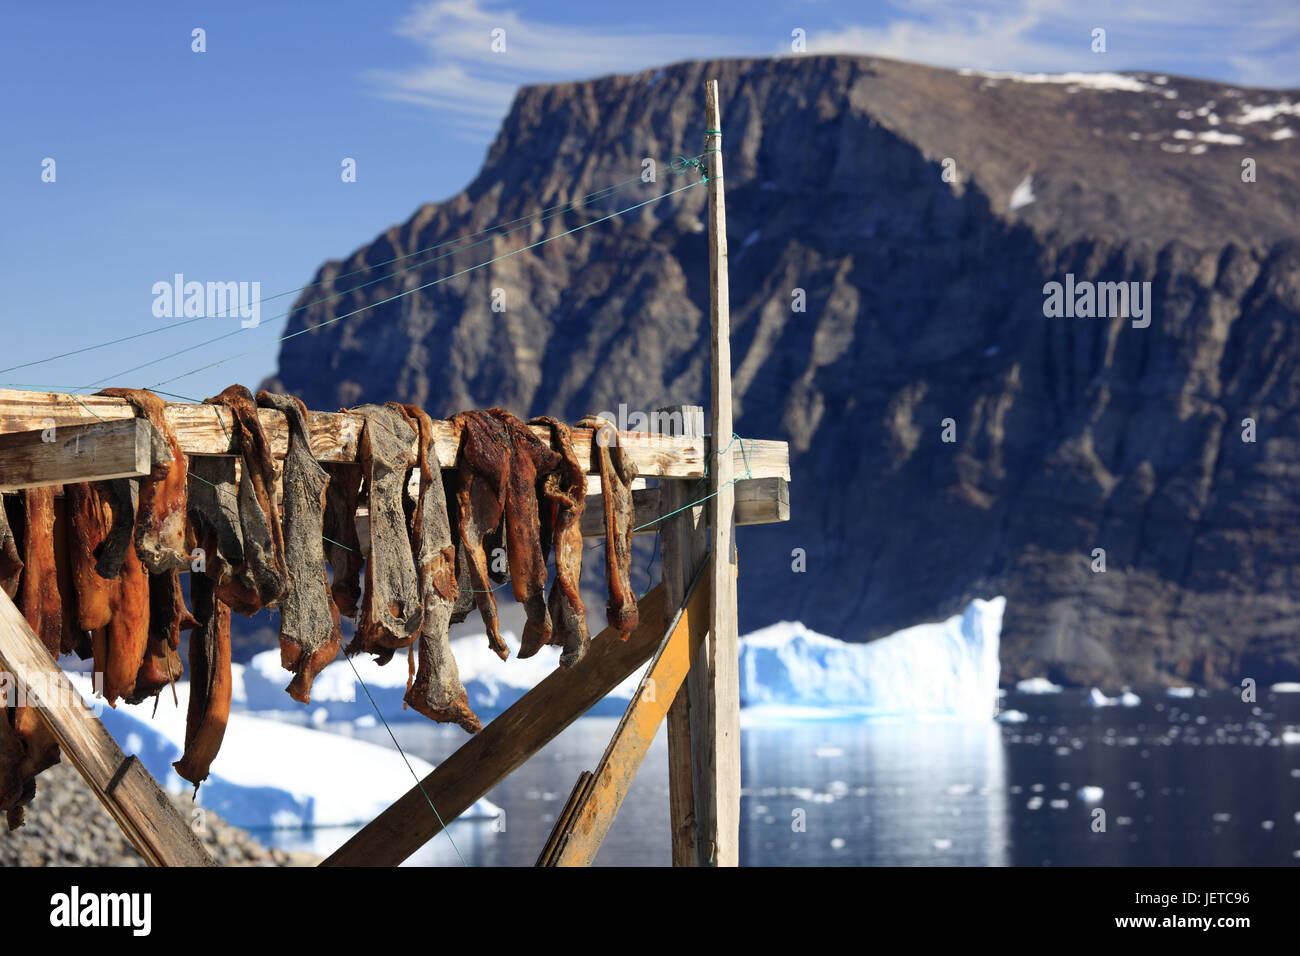 Greenland, Uummannaq, wooden rack, detail, dry fish, hang, background, icebergs, bile coast, Northern Greenland, typically, fish, food fish, drying, post, Food, typically for country, preservation, dried fish, aerial drying, outside, deserted, strings, the Arctic, ice, fjord, shore, blur, Stock Photo